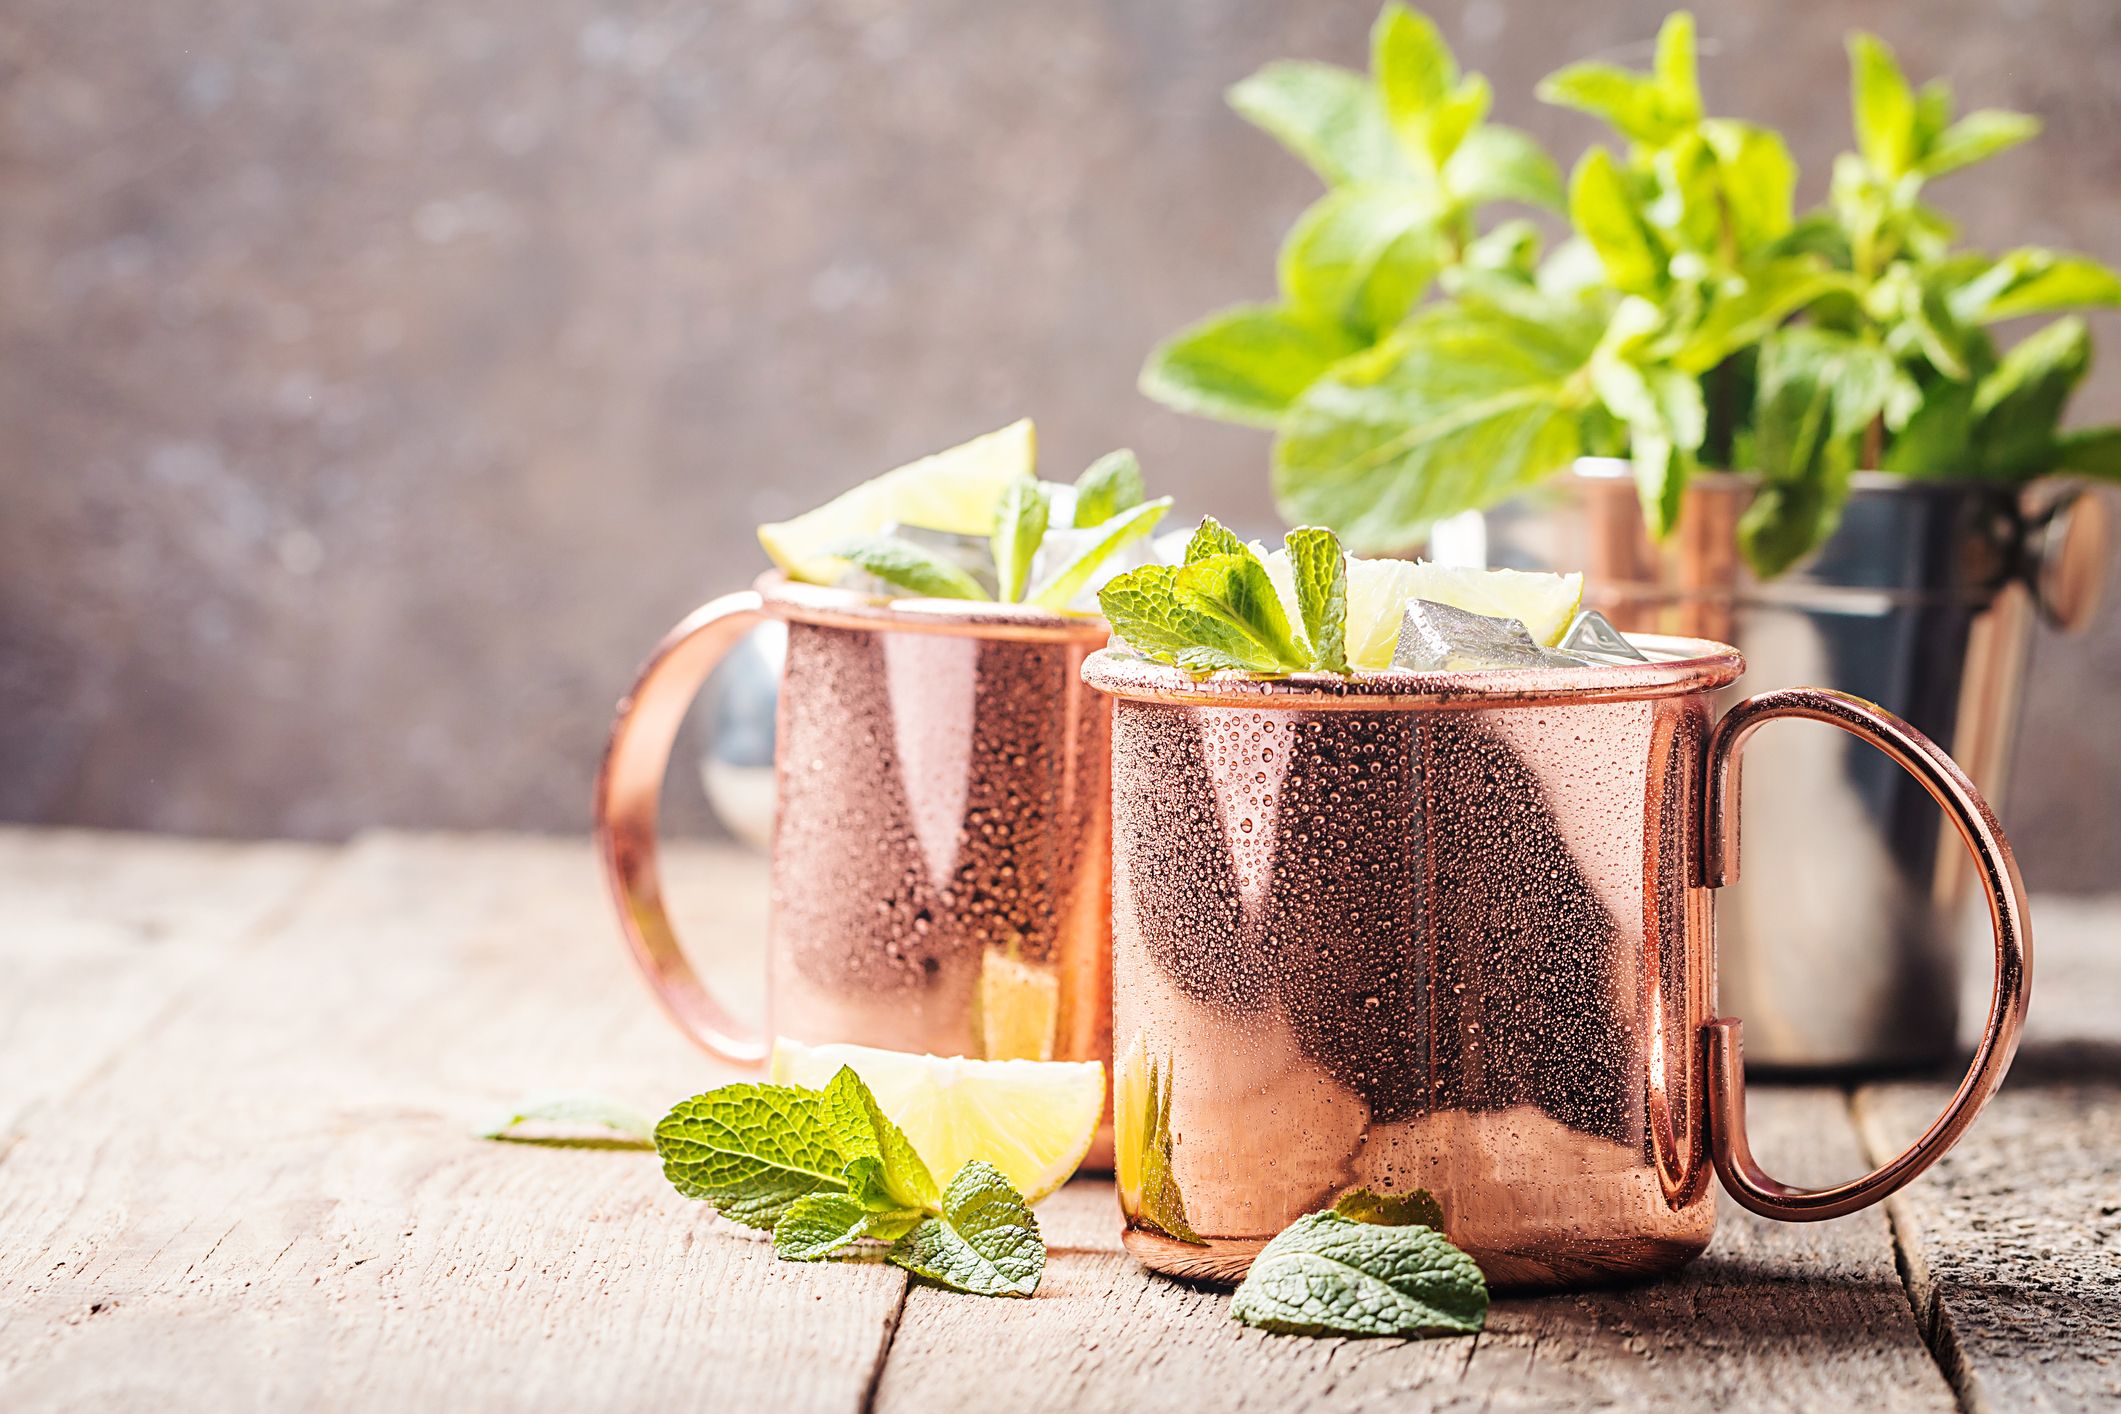 Upkey Moscow Mule Copper Mugs Set of 4 Moscow Mule Cups Copper Cocktail Drinking Mug Kitchen Cup 16 oz Copper Cups with 4 Cocktail Copper Straws for Dining Entertaining Bar Moscow Mule Gift Set